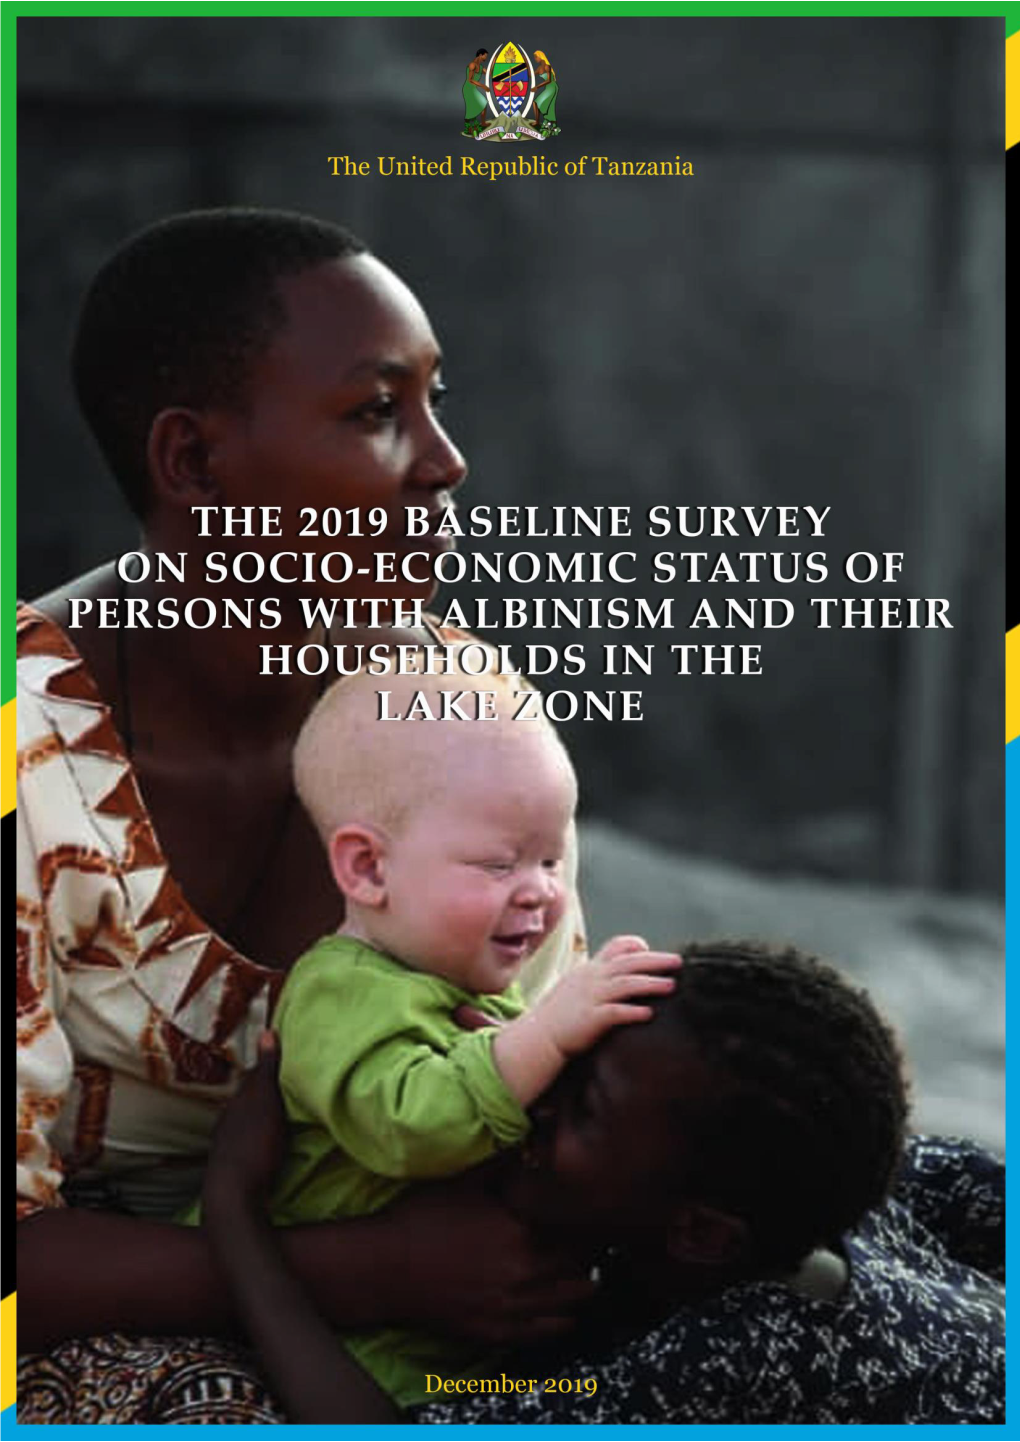 The 2019 Baseline Survey on Socio-Economic Status of Persons with Albinism and Their Households in the Lake Zone